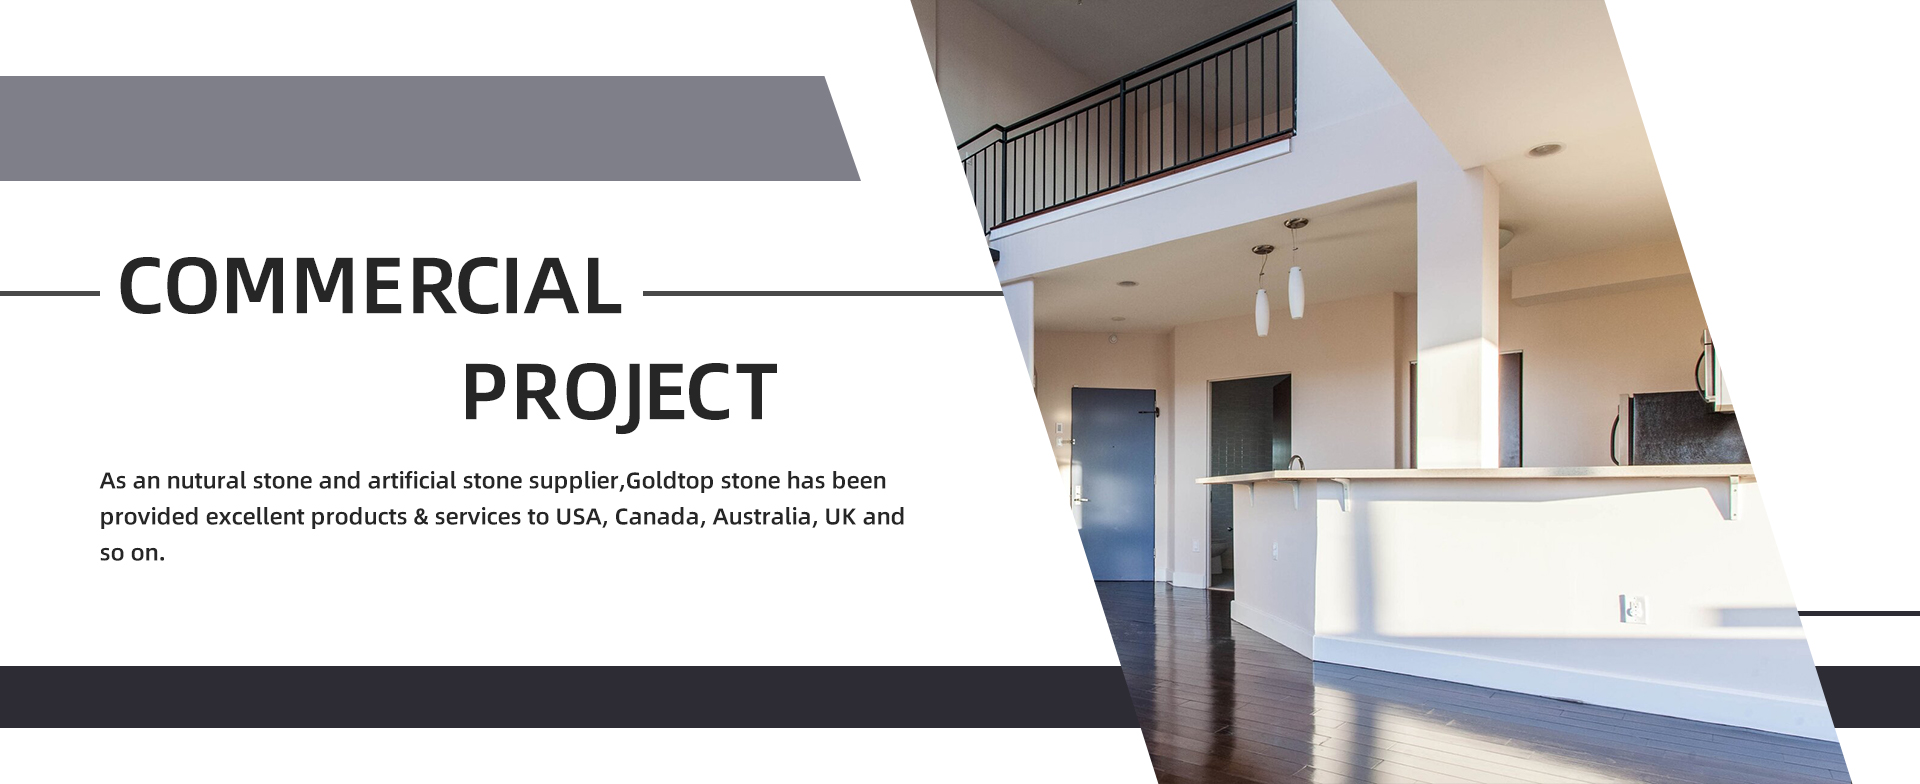 Commercial Project  As an nutural stone and artificial stone supplier,Goldtop stone has been provided excellent products & services to USA, Canada, Australia, UK and so on.